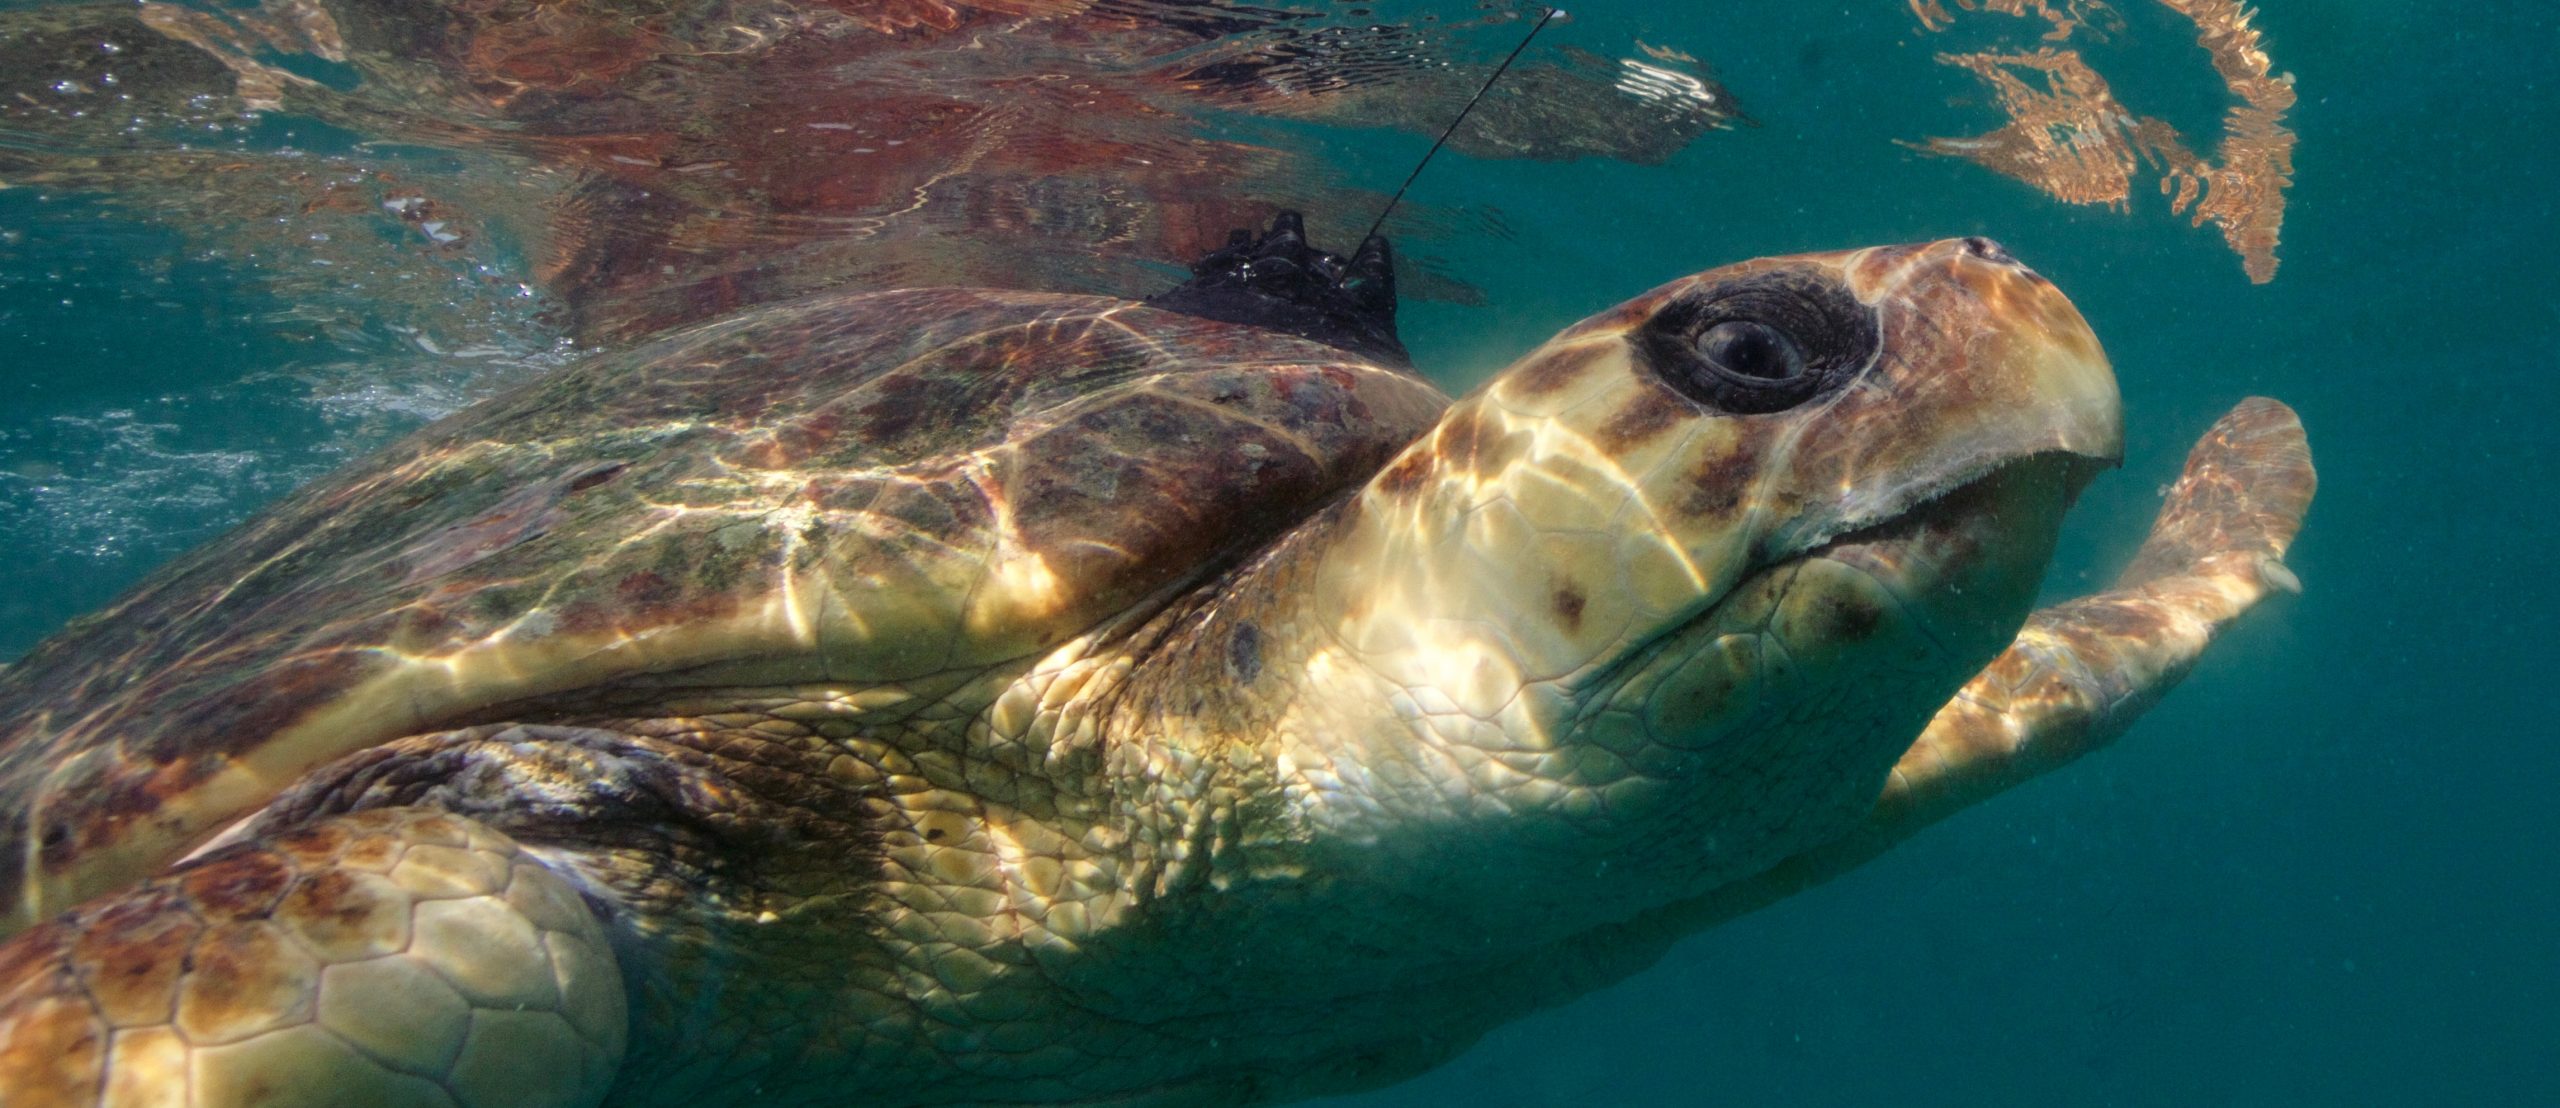 How do sea turtles fare after being rehabilitated and released?